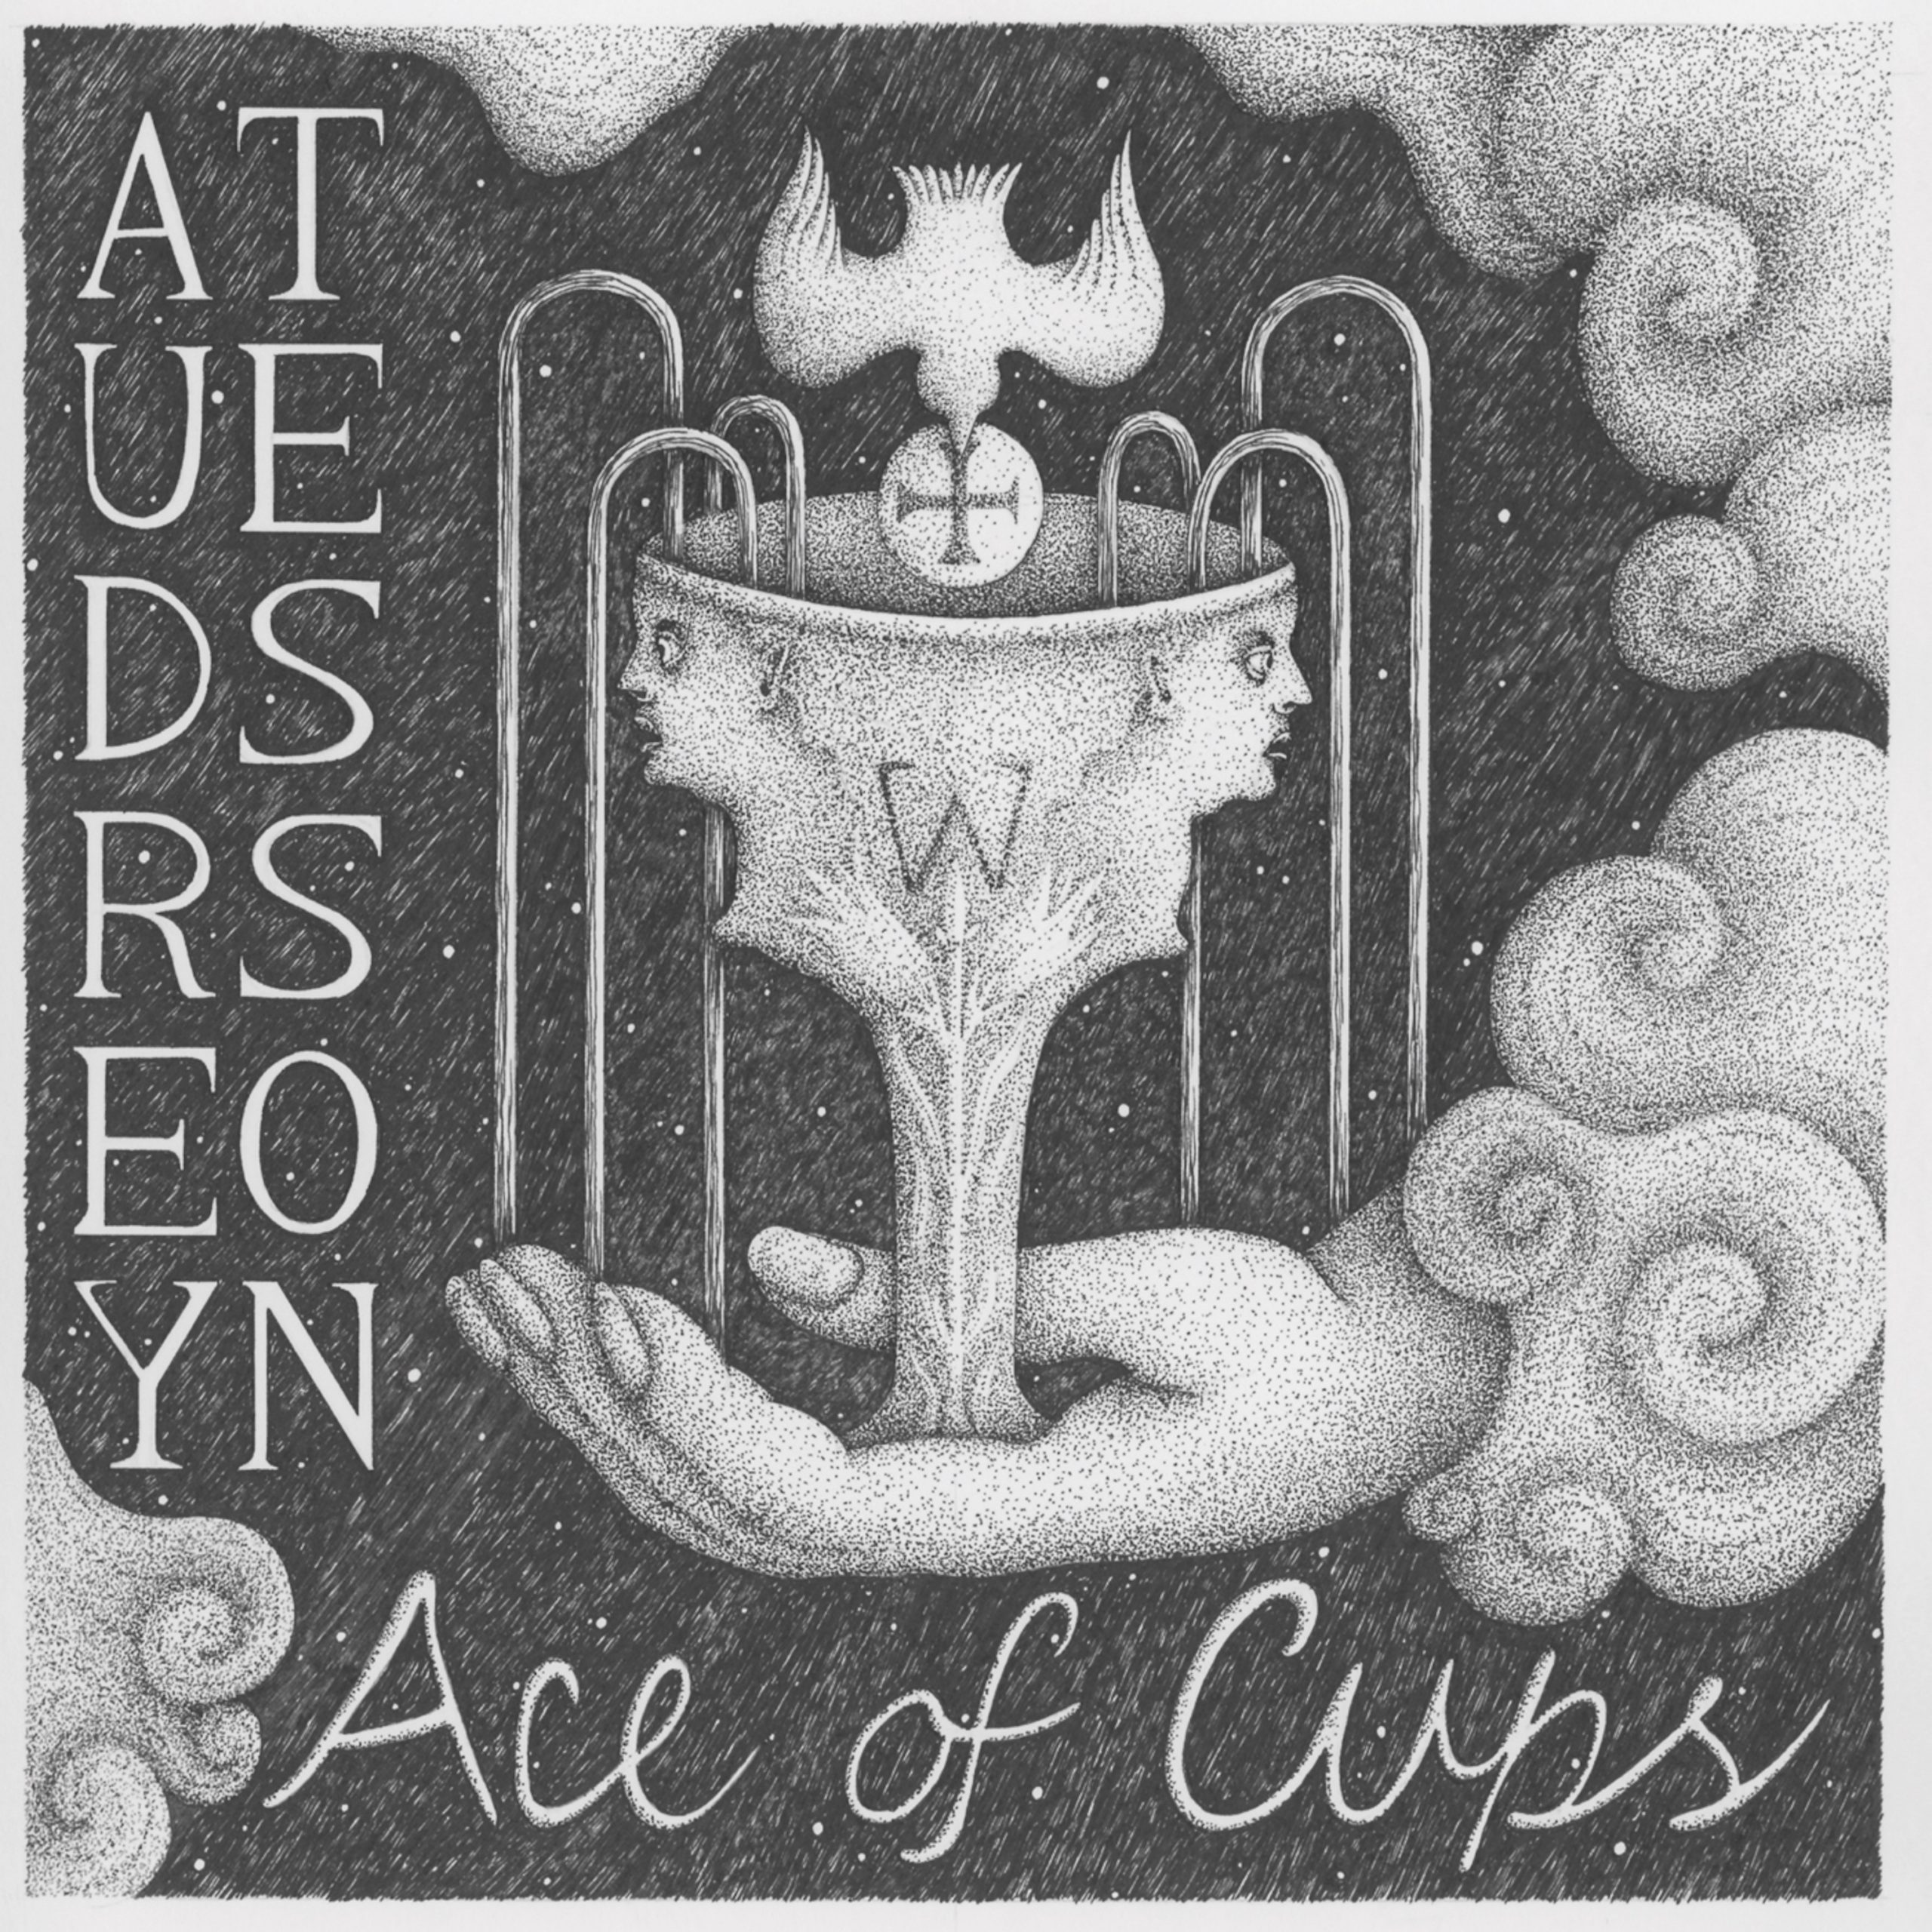 Ace of Cups Cover Audrey Tesson for EP